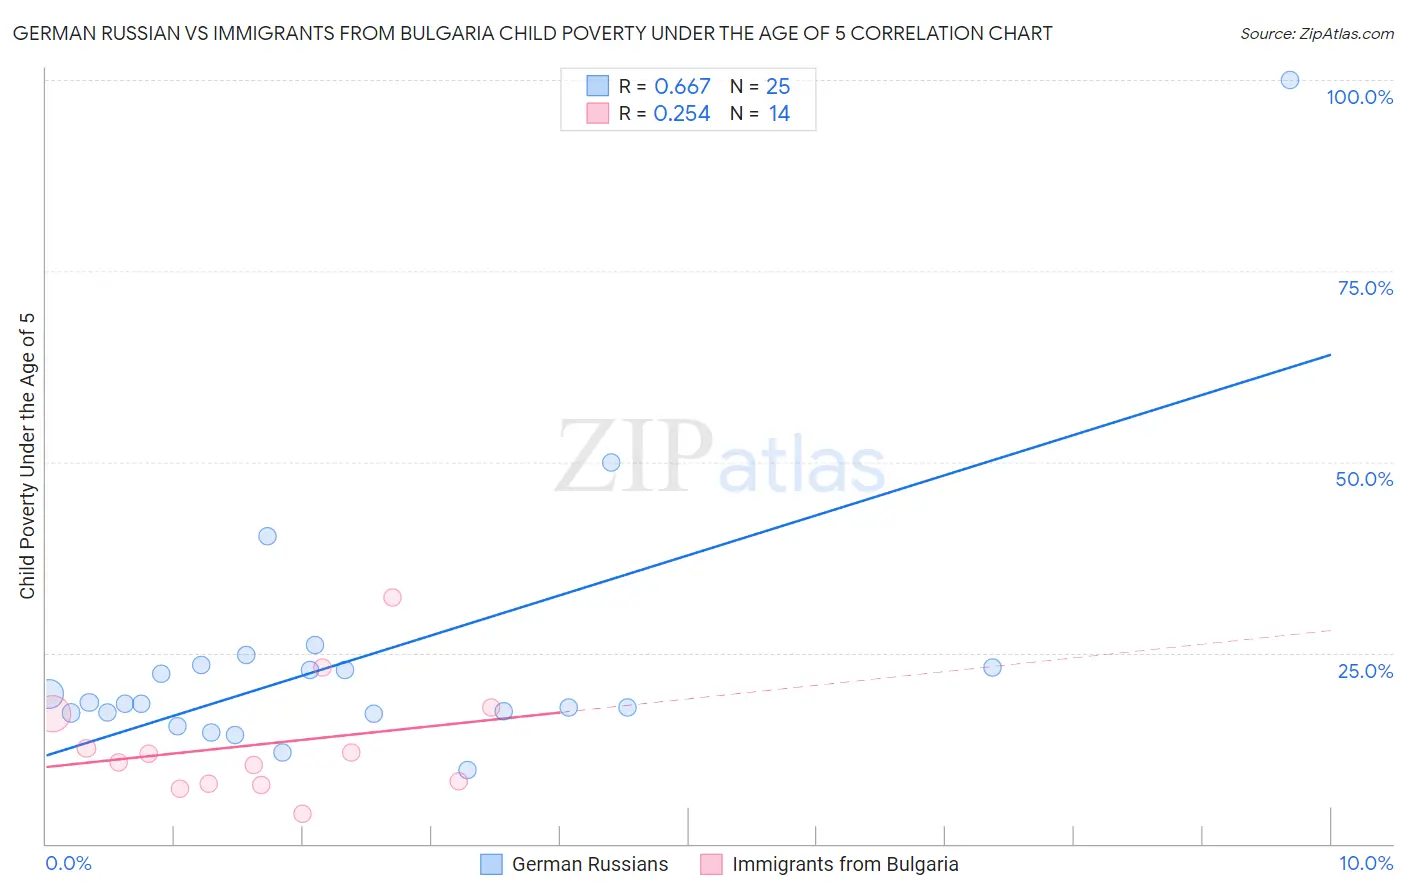 German Russian vs Immigrants from Bulgaria Child Poverty Under the Age of 5